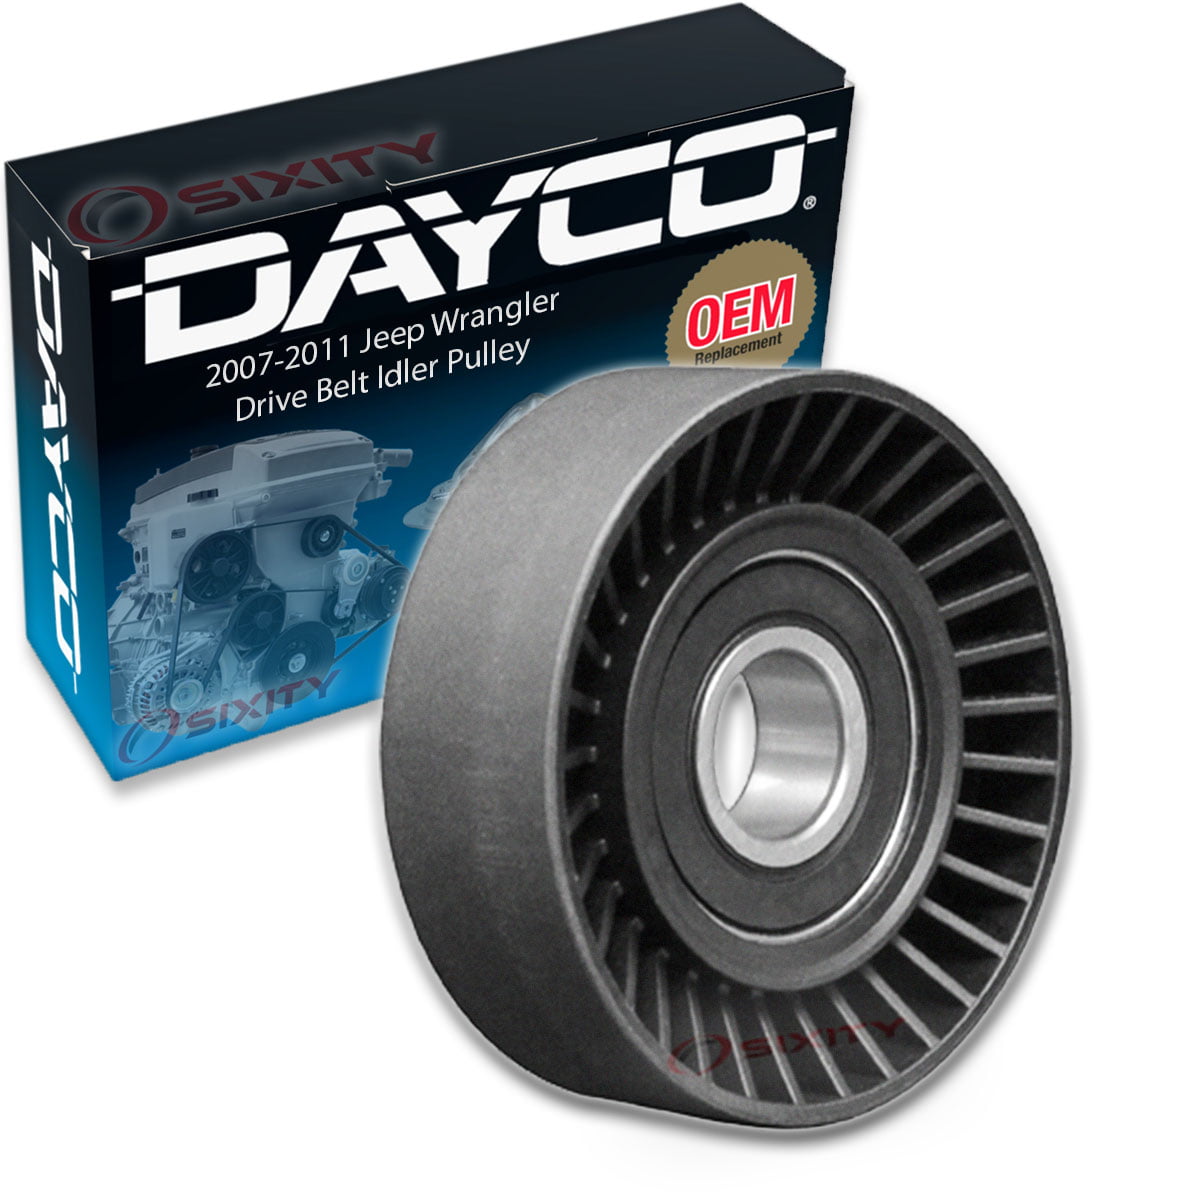 Dayco Drive Belt Idler Pulley compatible with Jeep Wrangler 2007-2011  Engine Bearing Tension Belts Cooling Accessory System 